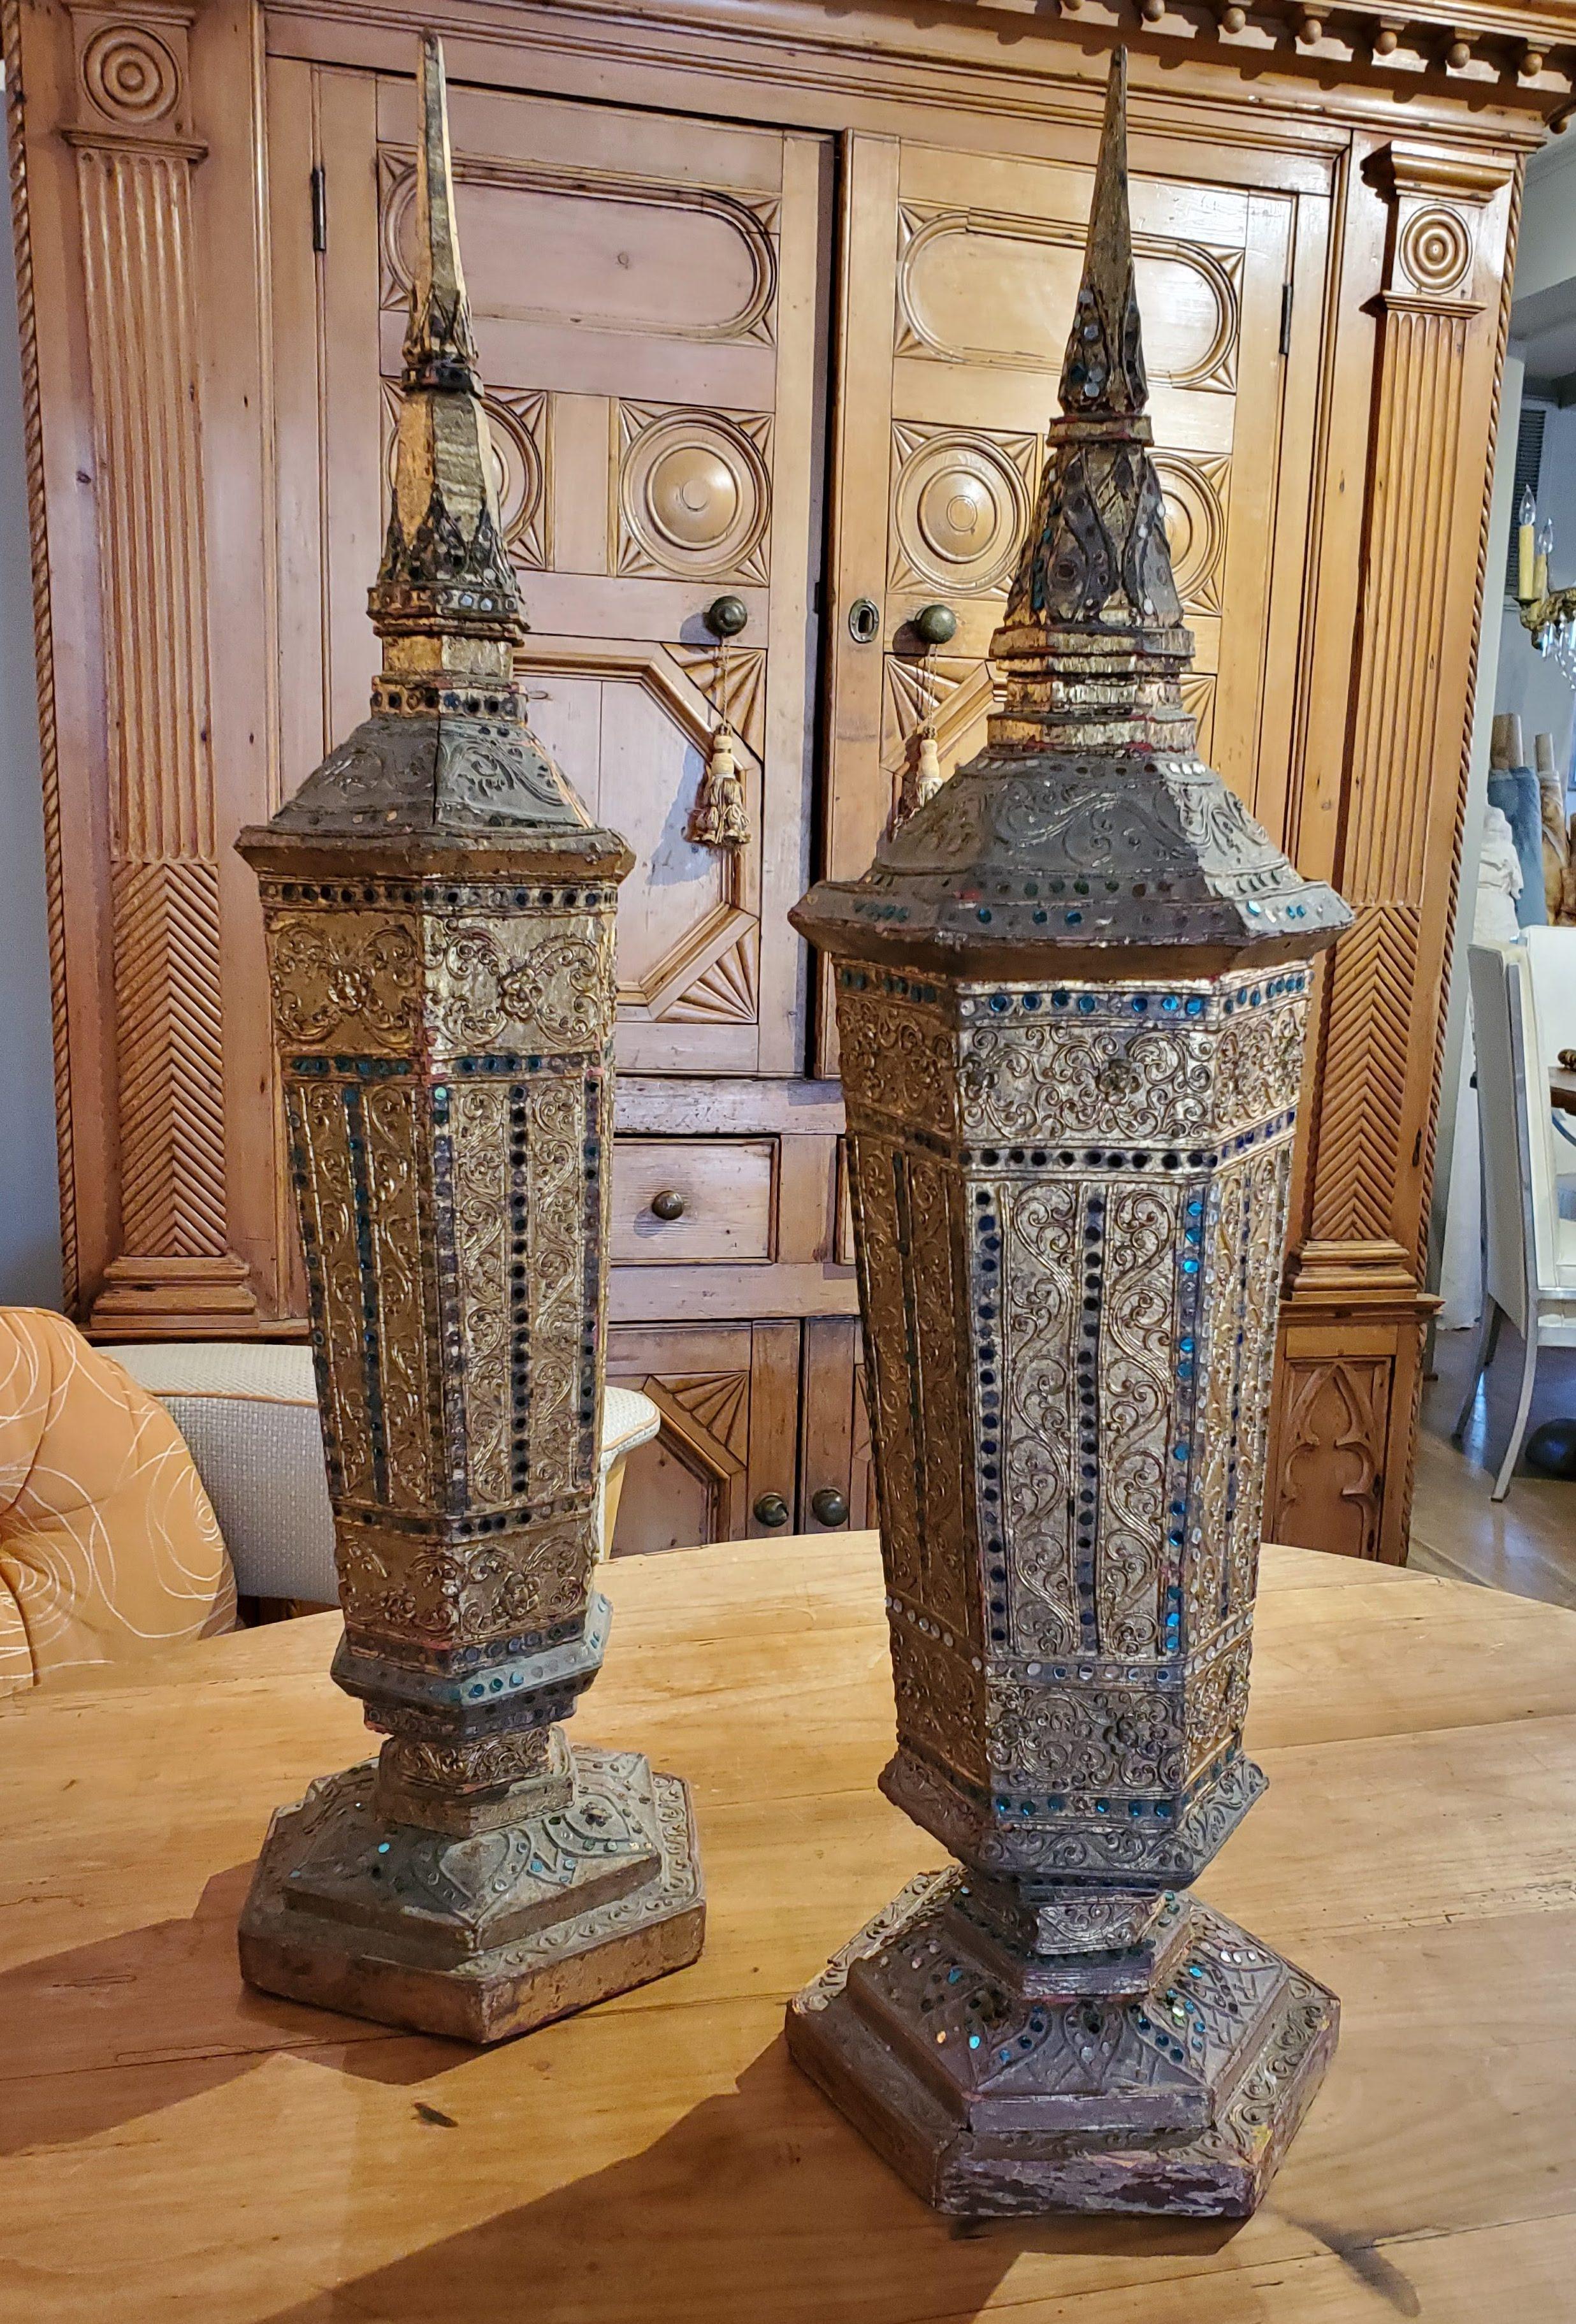 This pair of late 19th century decorative urns are not only beautiful they are totally unique. Hexagonal forms in golden gilt, inlaid with tiny colored mirrors, make these urns special. Each urn features it's own intricate design but from afar look